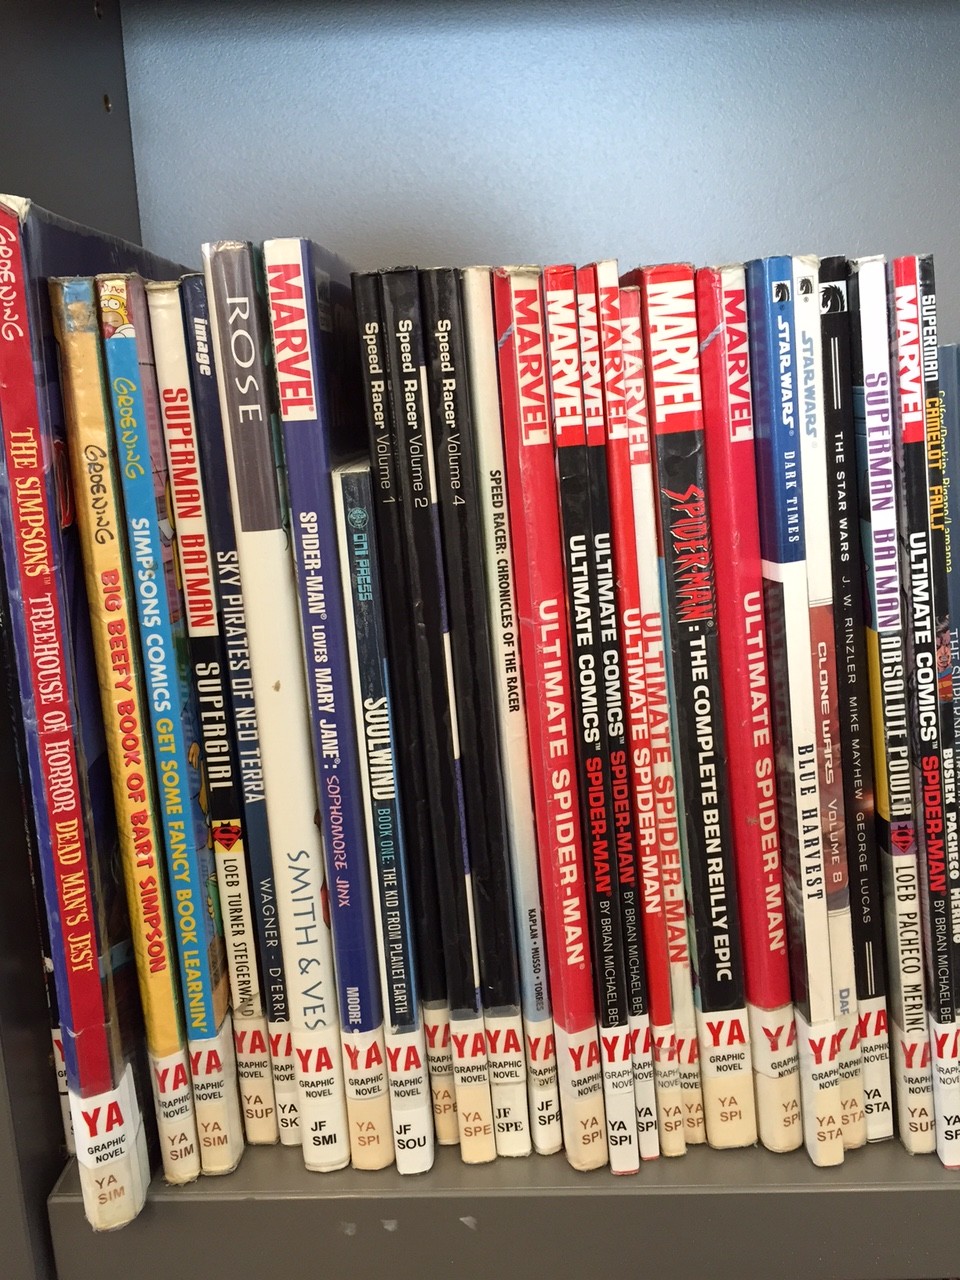 Comics ordered by series with spine labels.